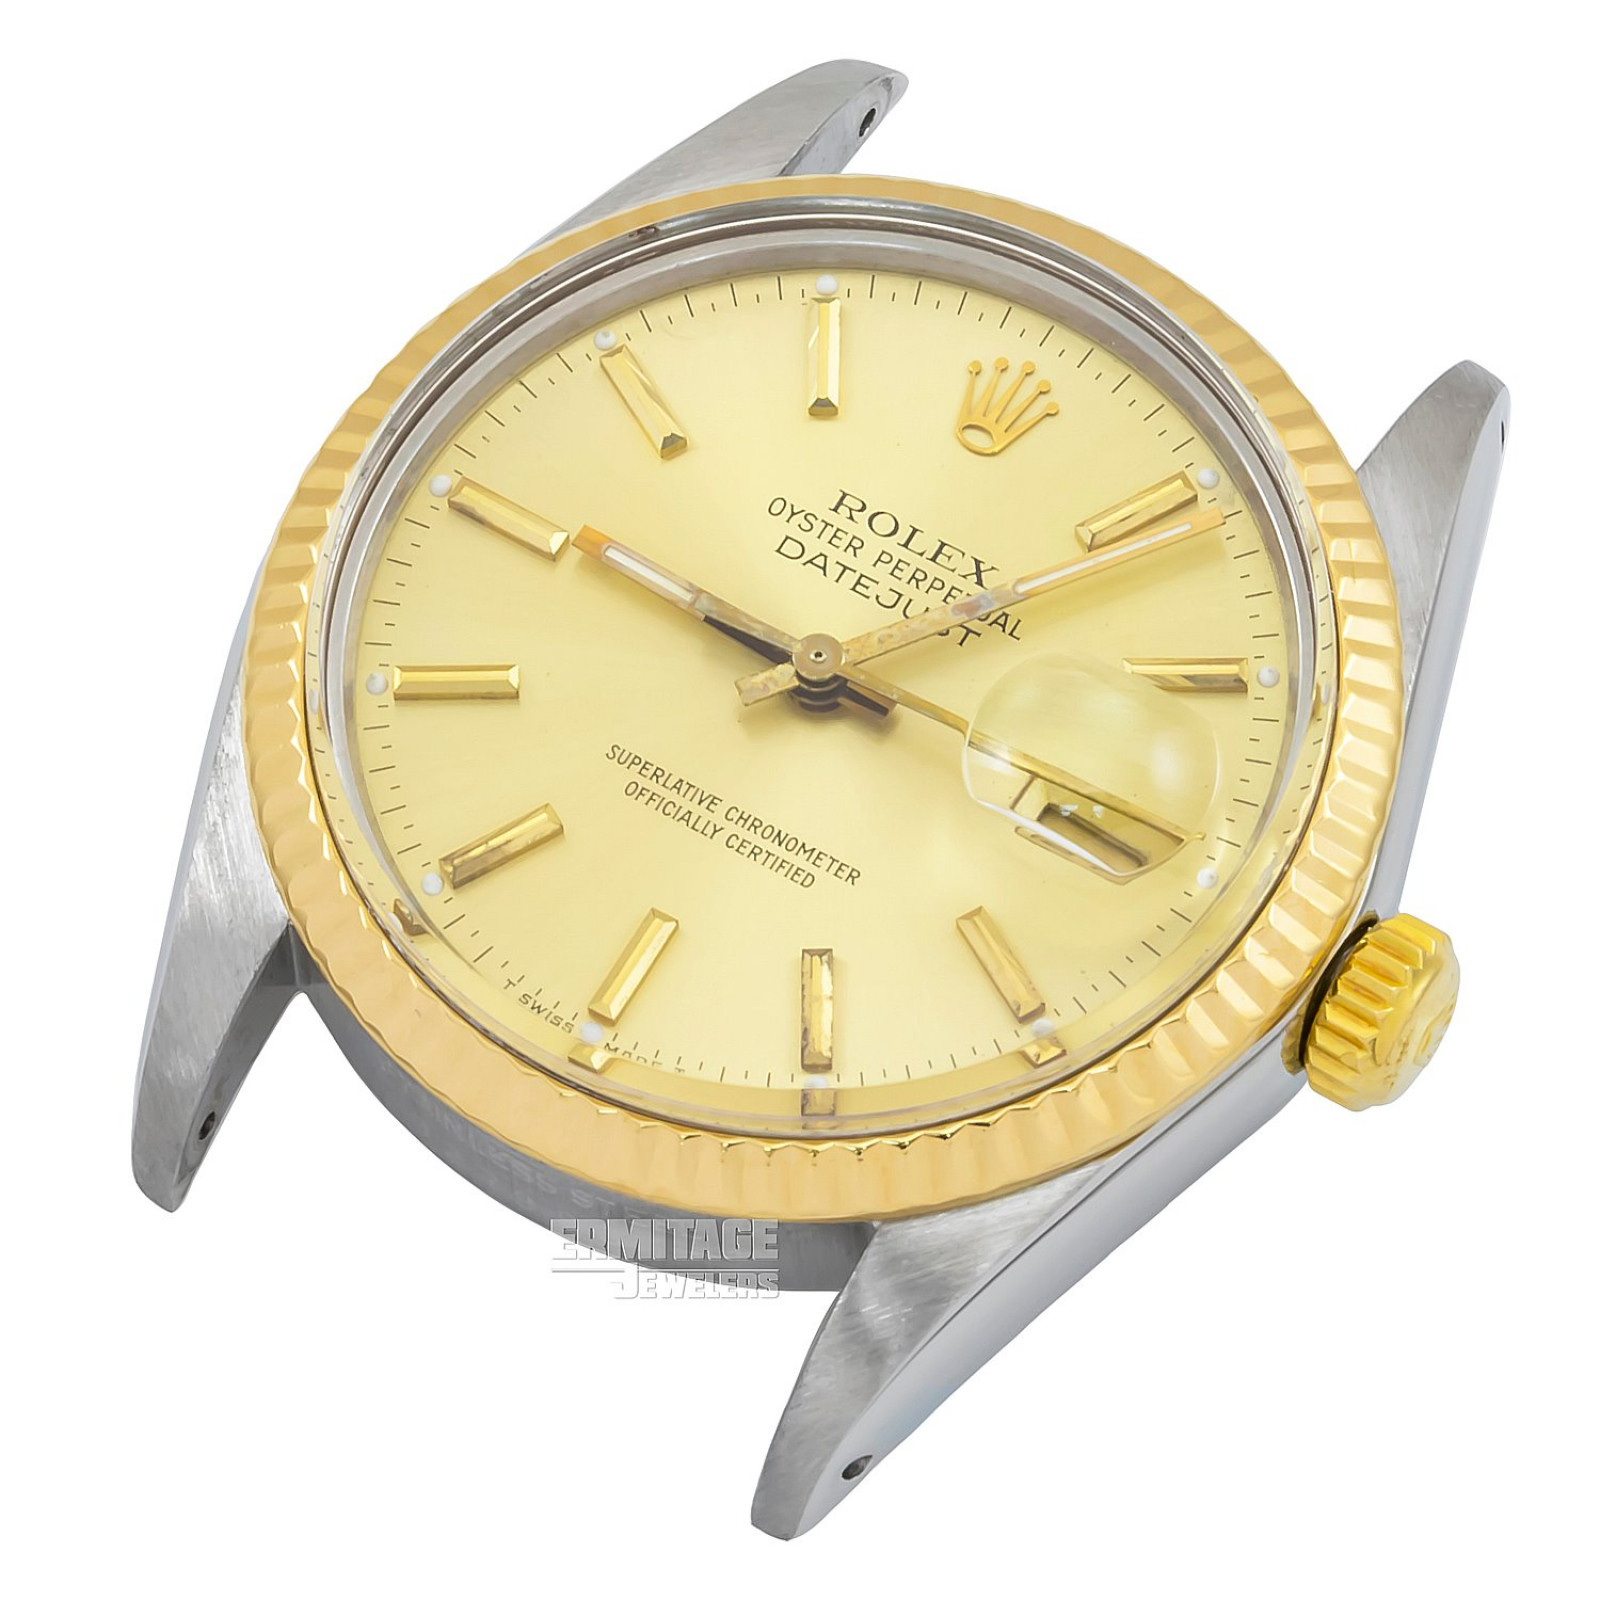 Pre-Owned Rolex Datejust Turn-O-Graph 16253 Stainless Steel, 18kt Yellow Gold & Stainless Steel 36 mm Gold Index